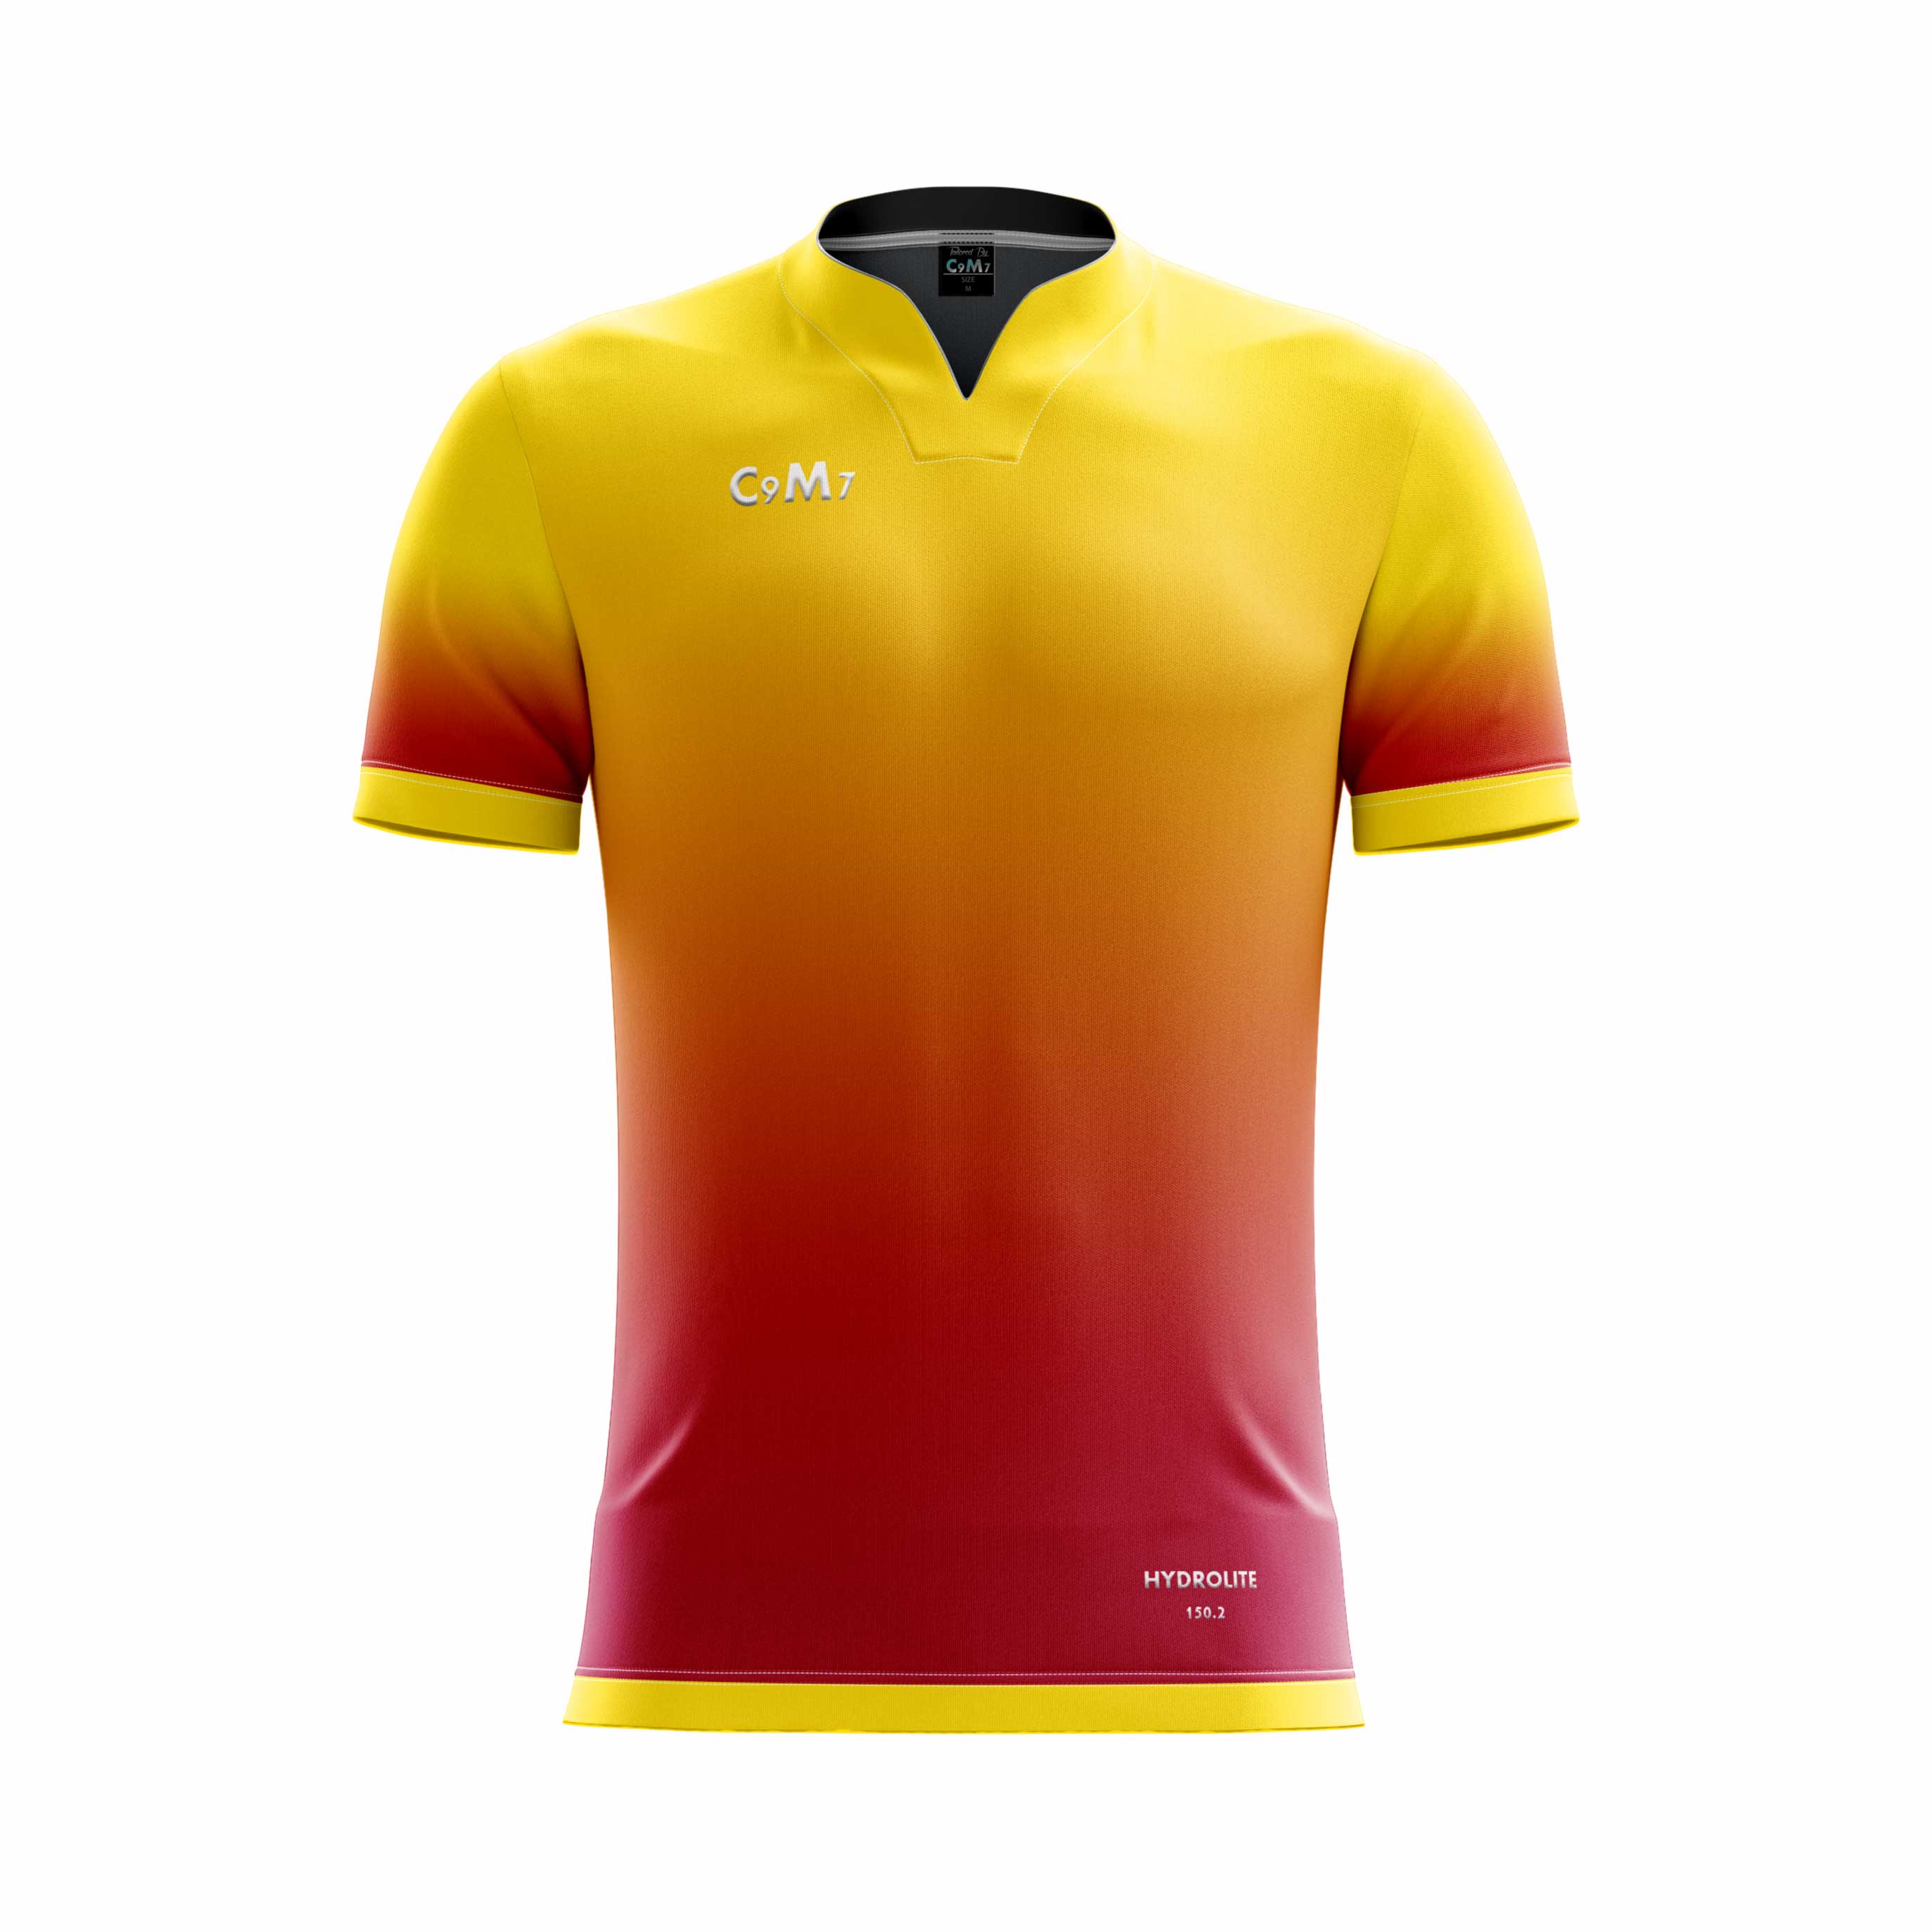 yellow red jersey